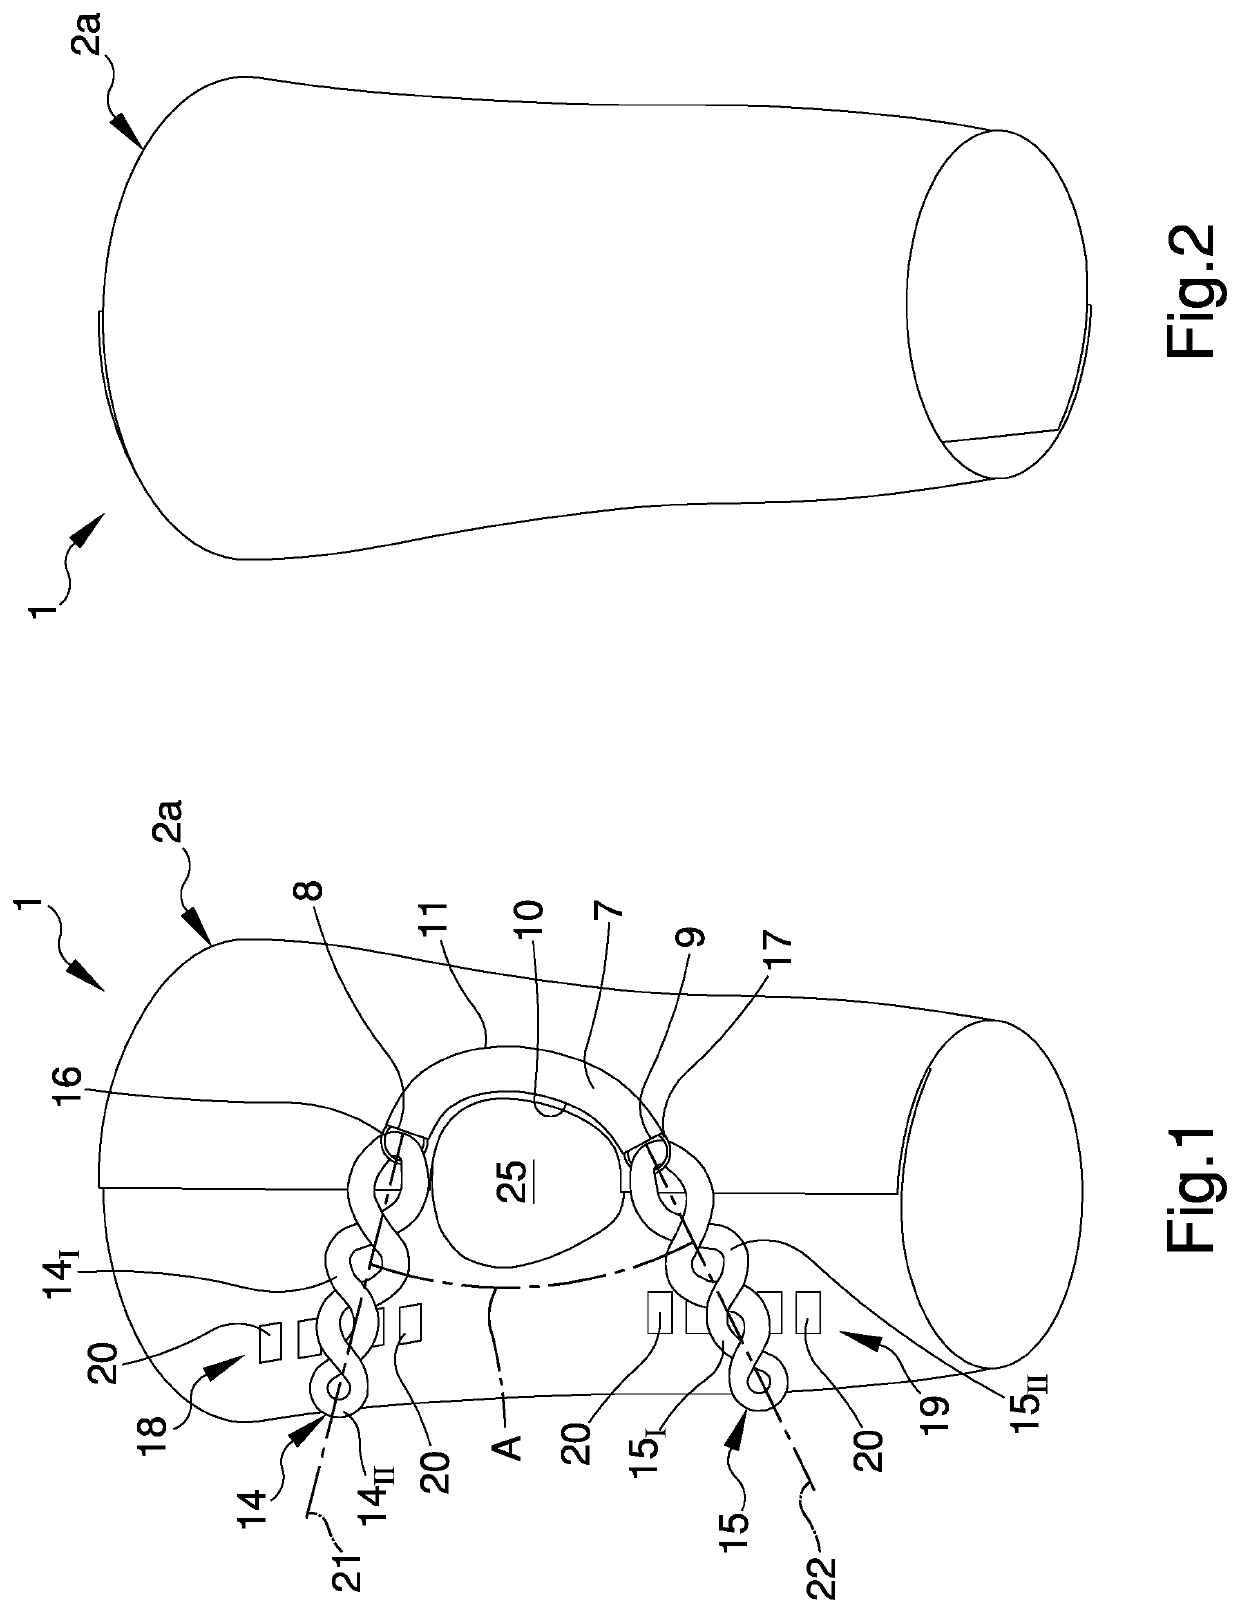 Joint stabilization device, particularly for the patellofemoral joint